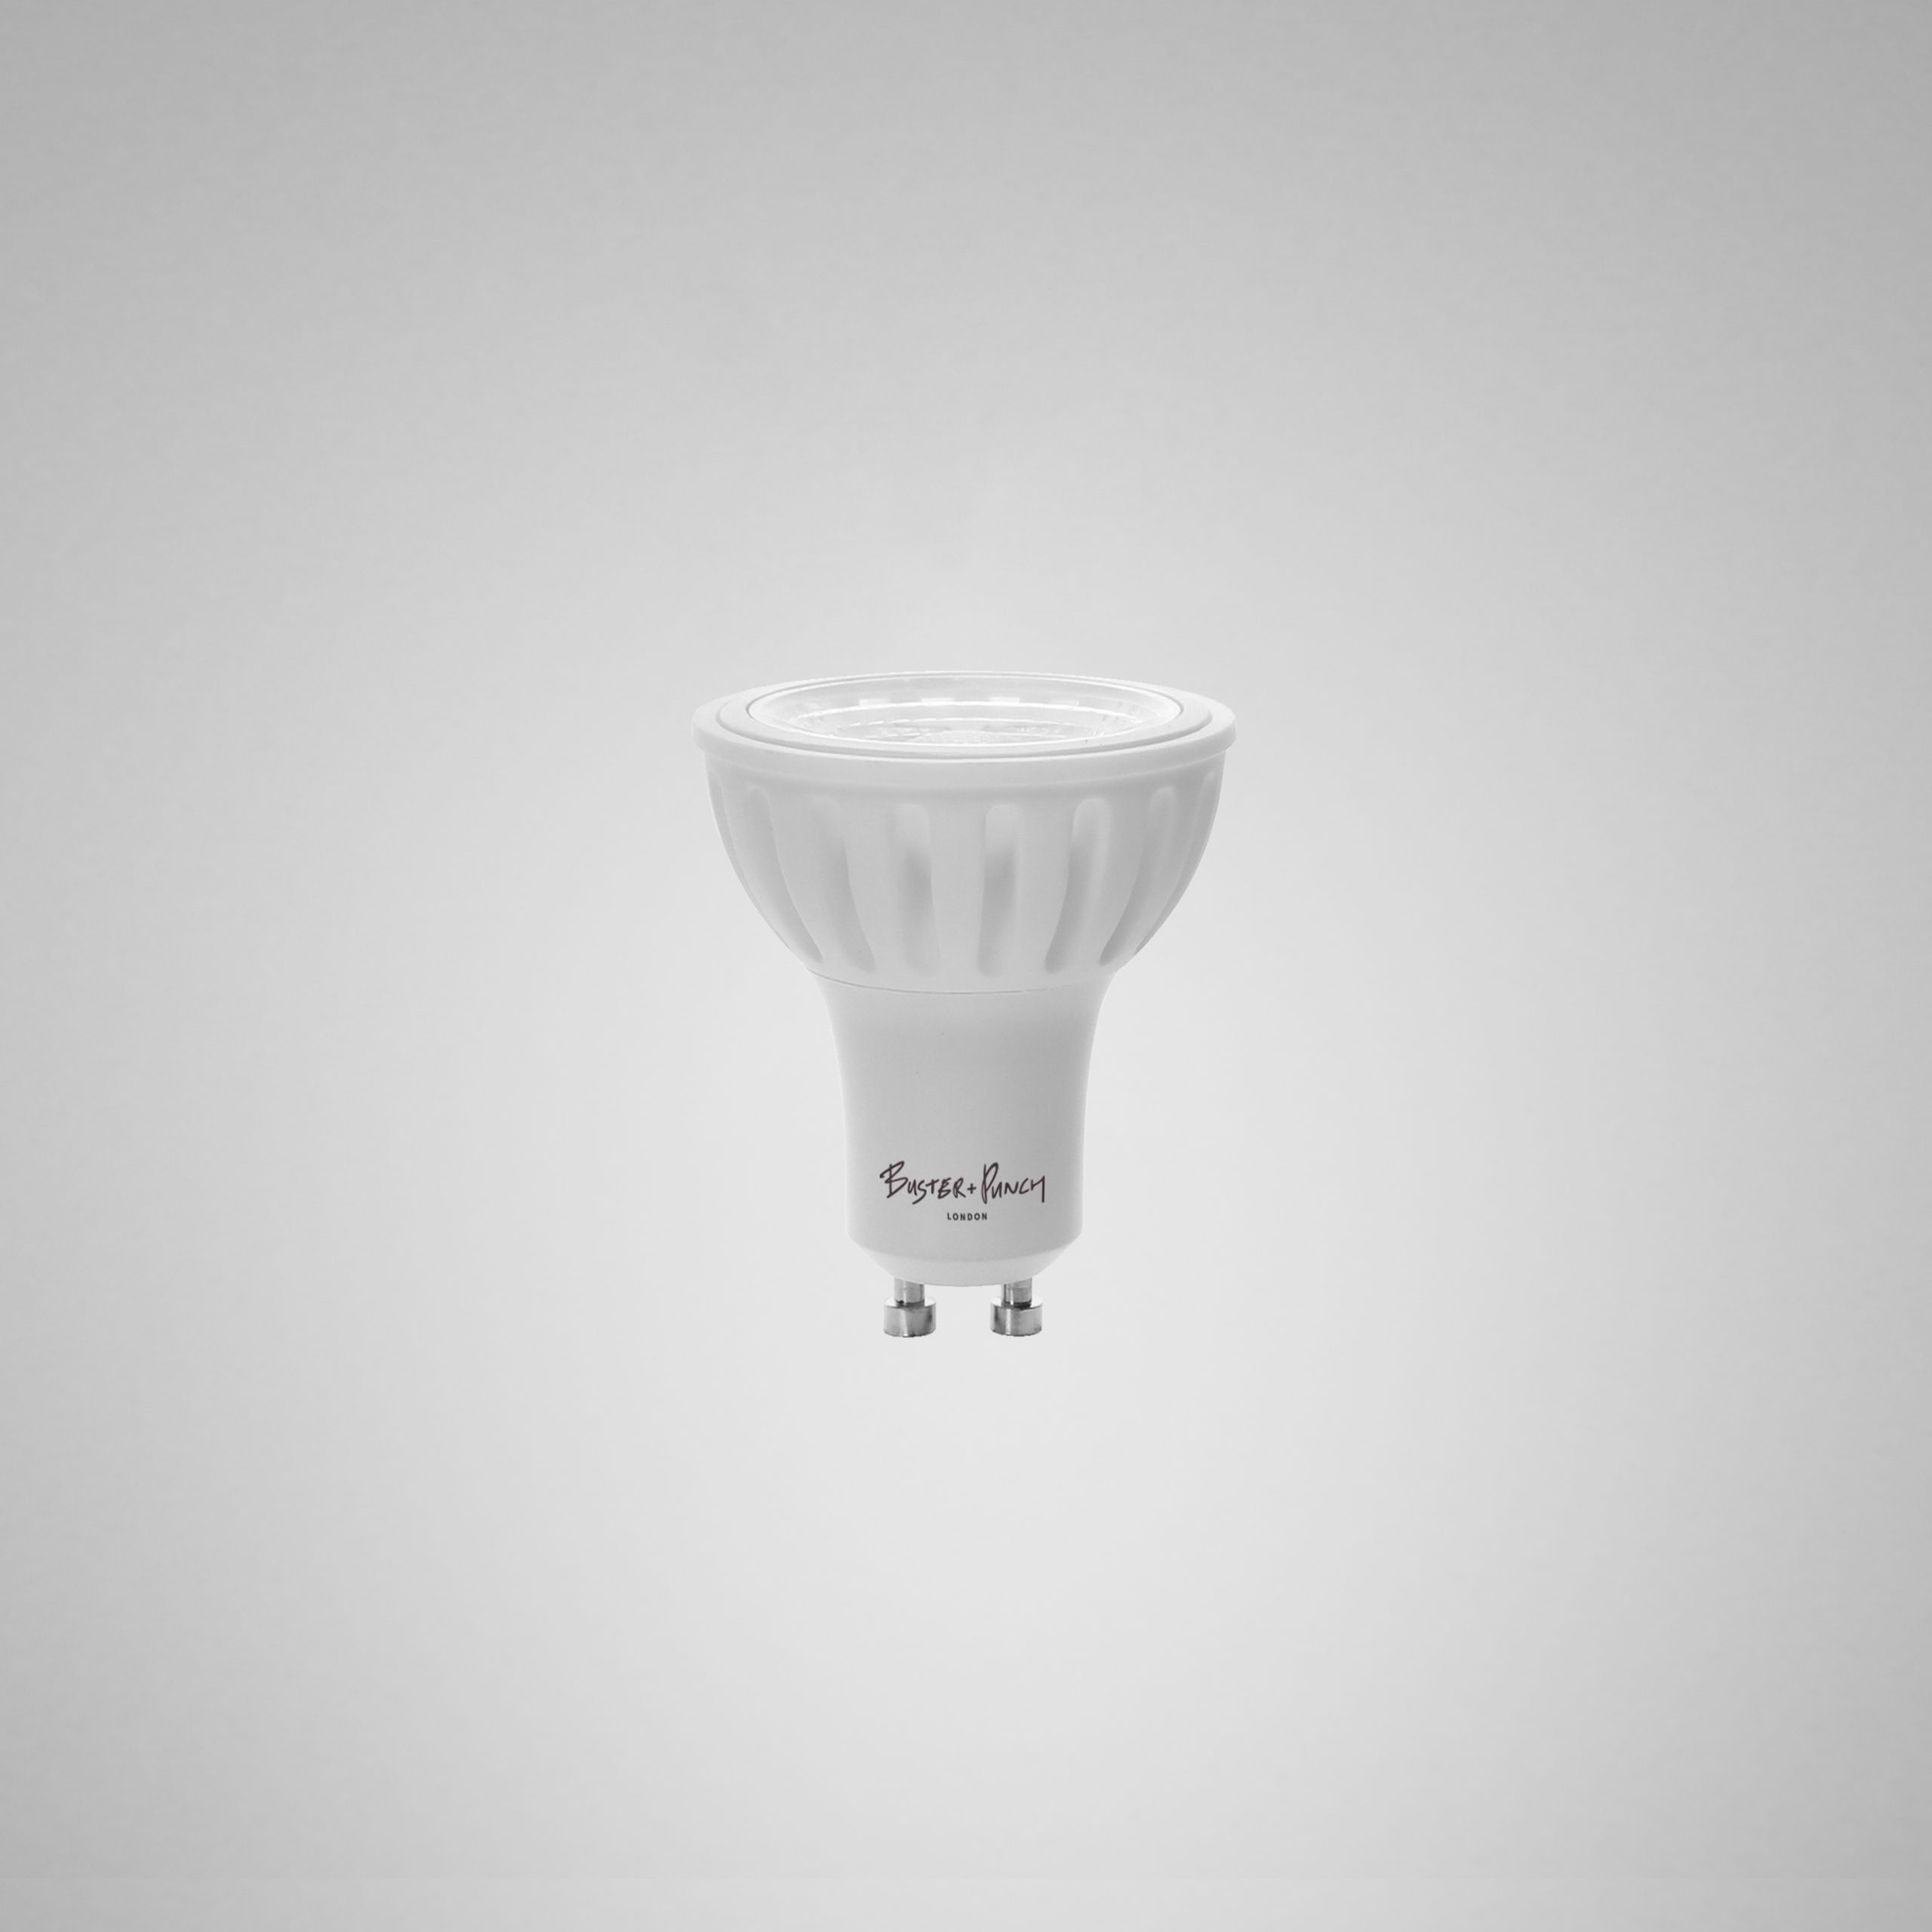 EXHAUST BULB / GU10 / DIMMABLE / POLYCARBONATE